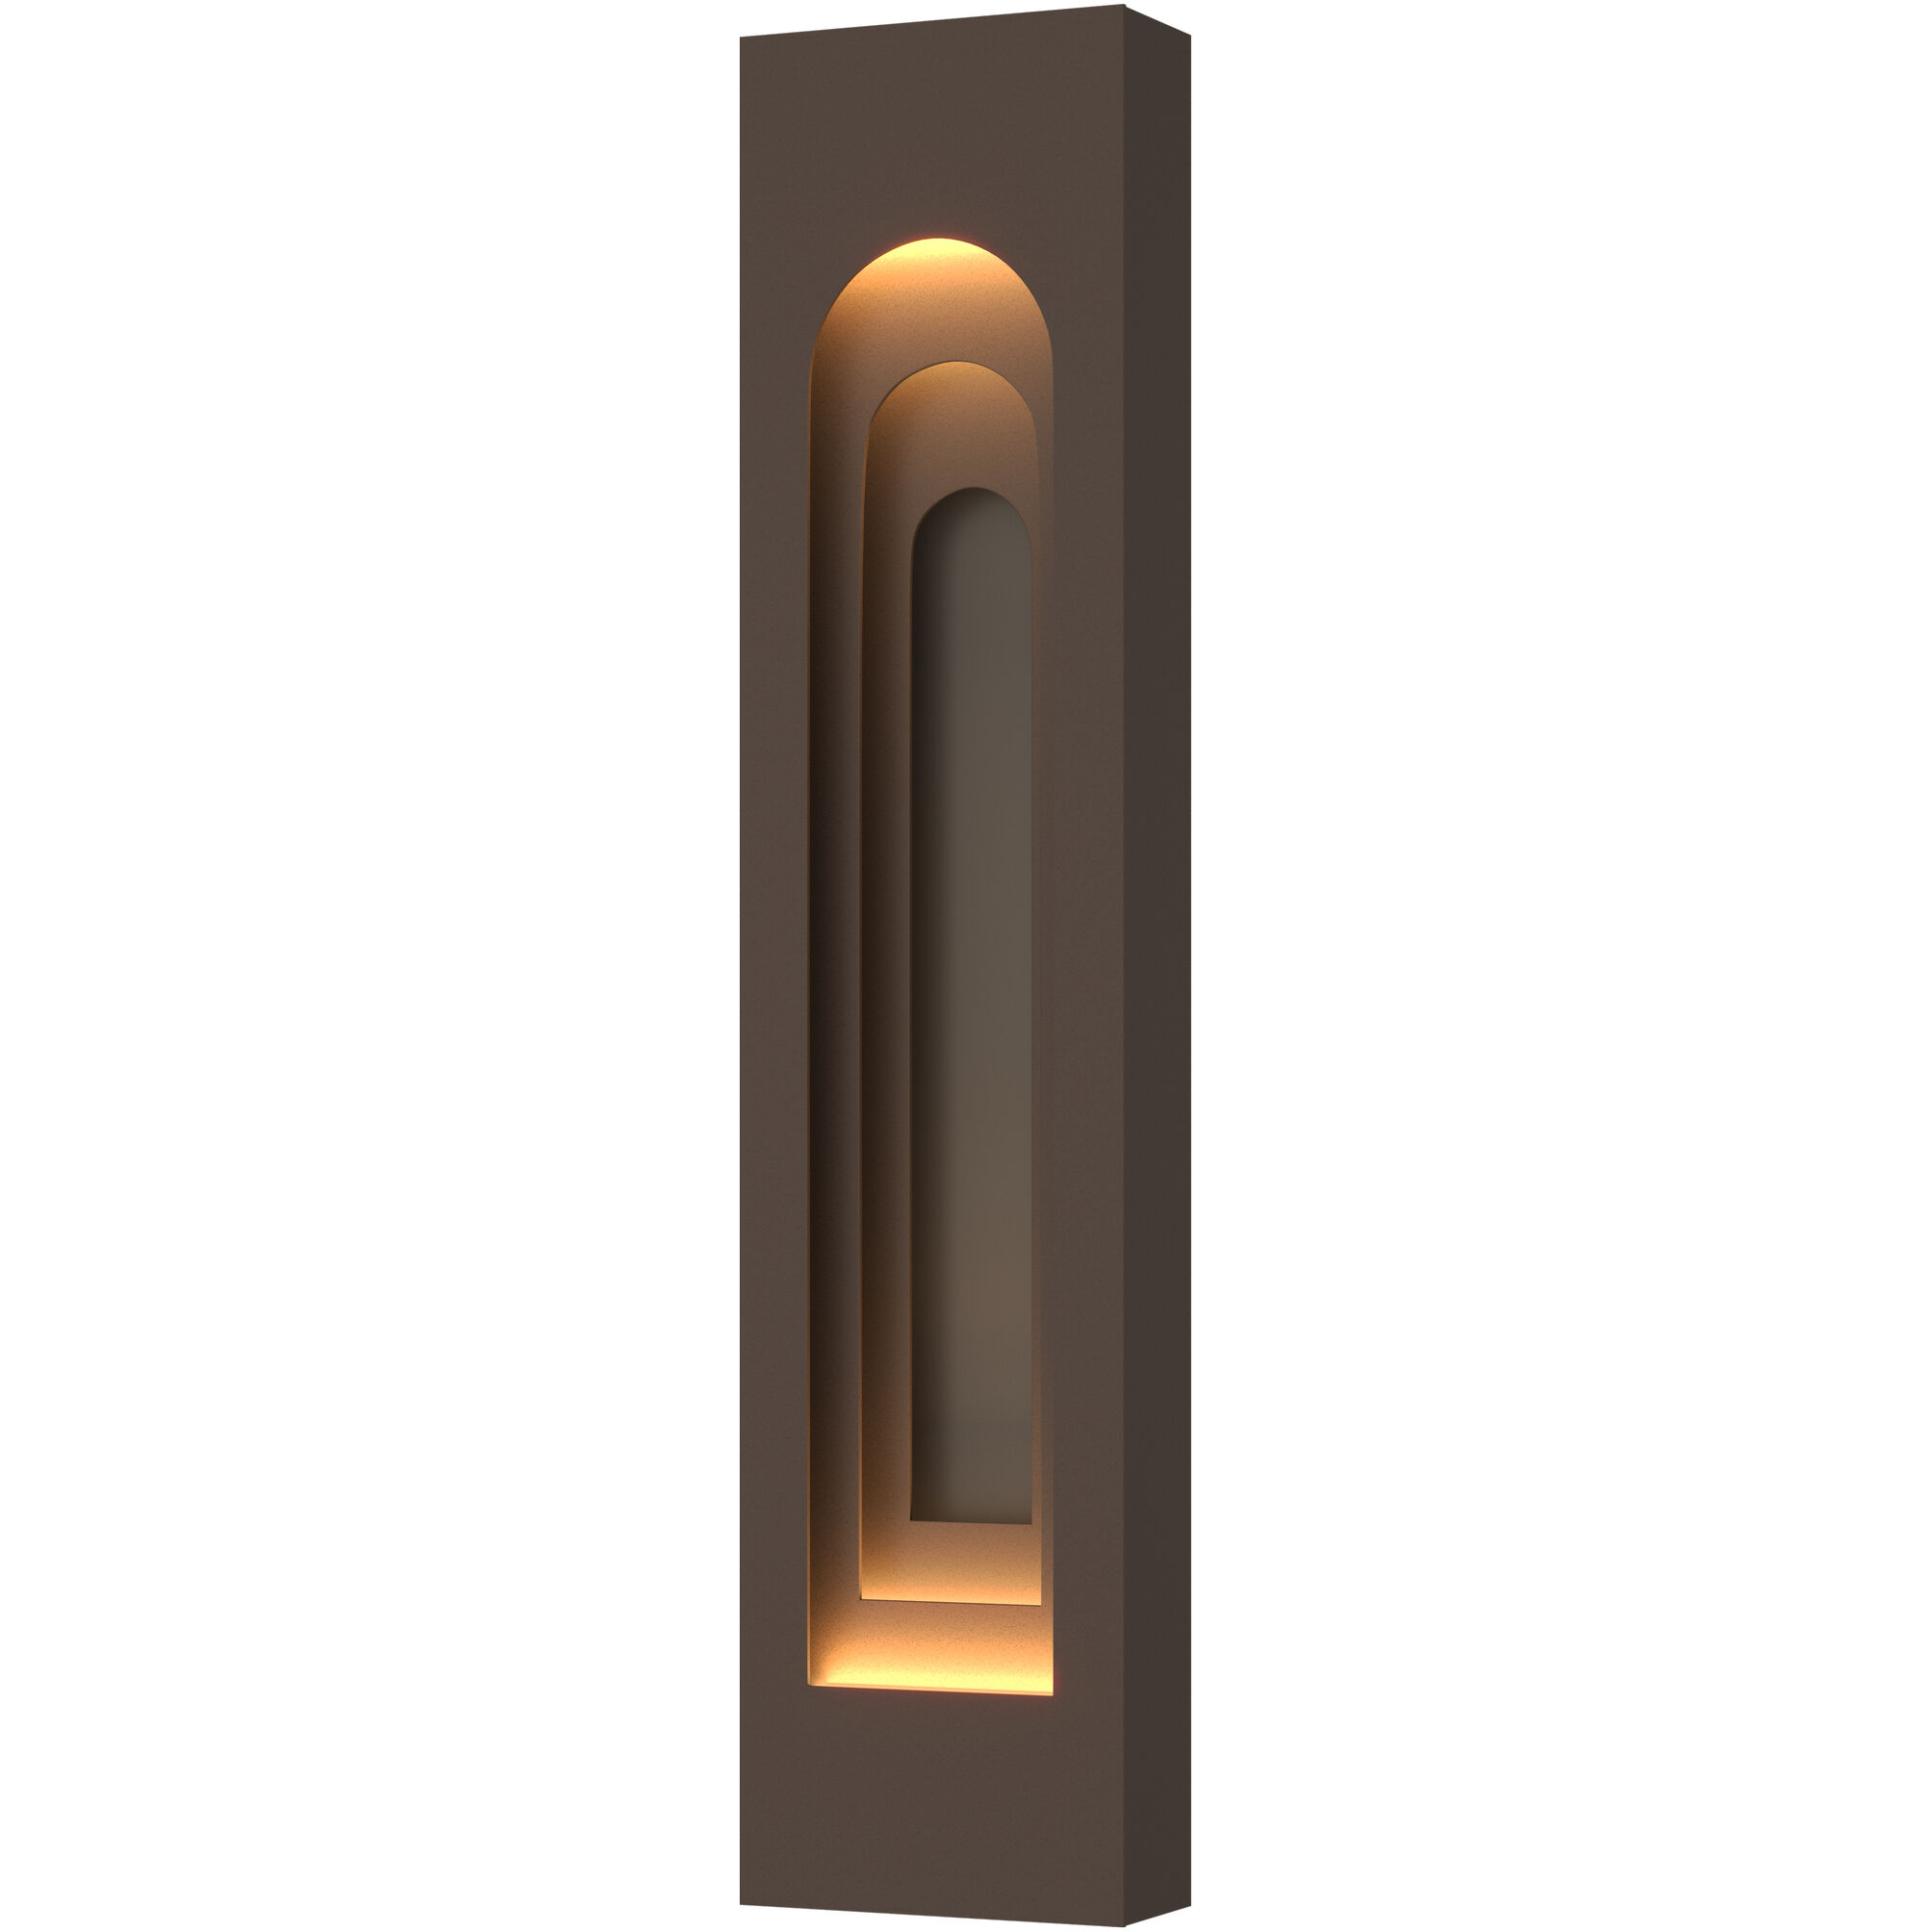 Art + Alchemy Procession Arch Outdoor Wall Light